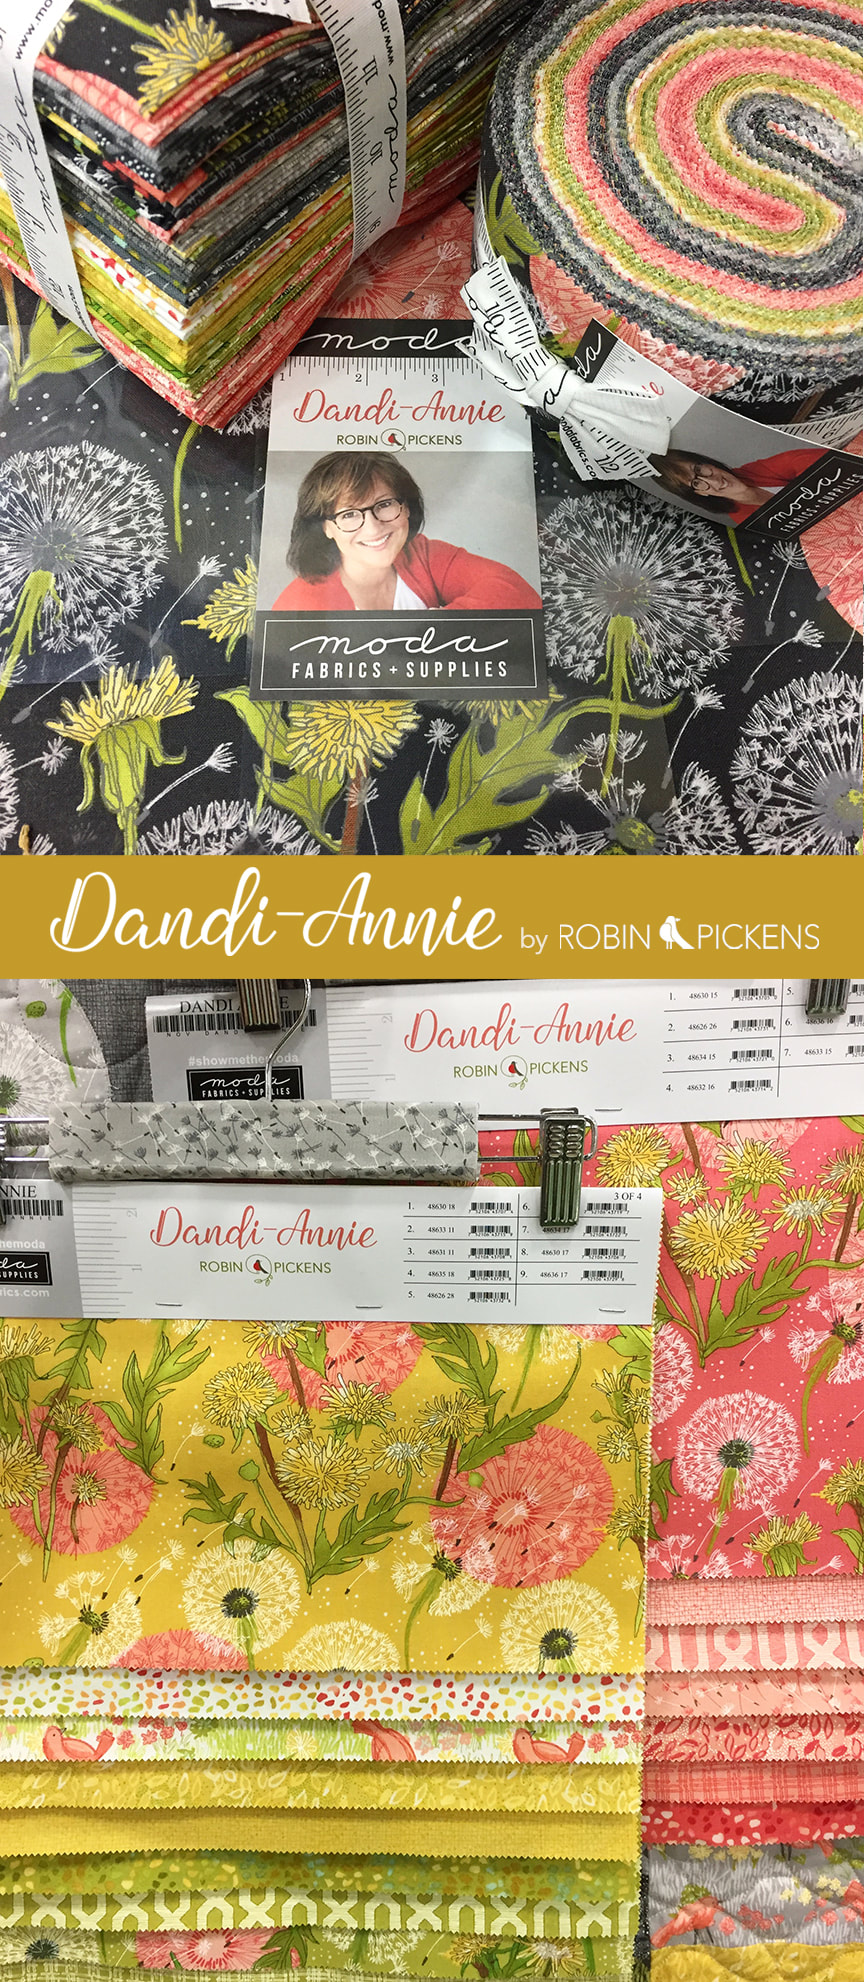 Dandi Annie fabric collection by Robin Pickens for Moda and quilting. Dandelions and birds have fun in the warm gold, green, gray and peach colors.